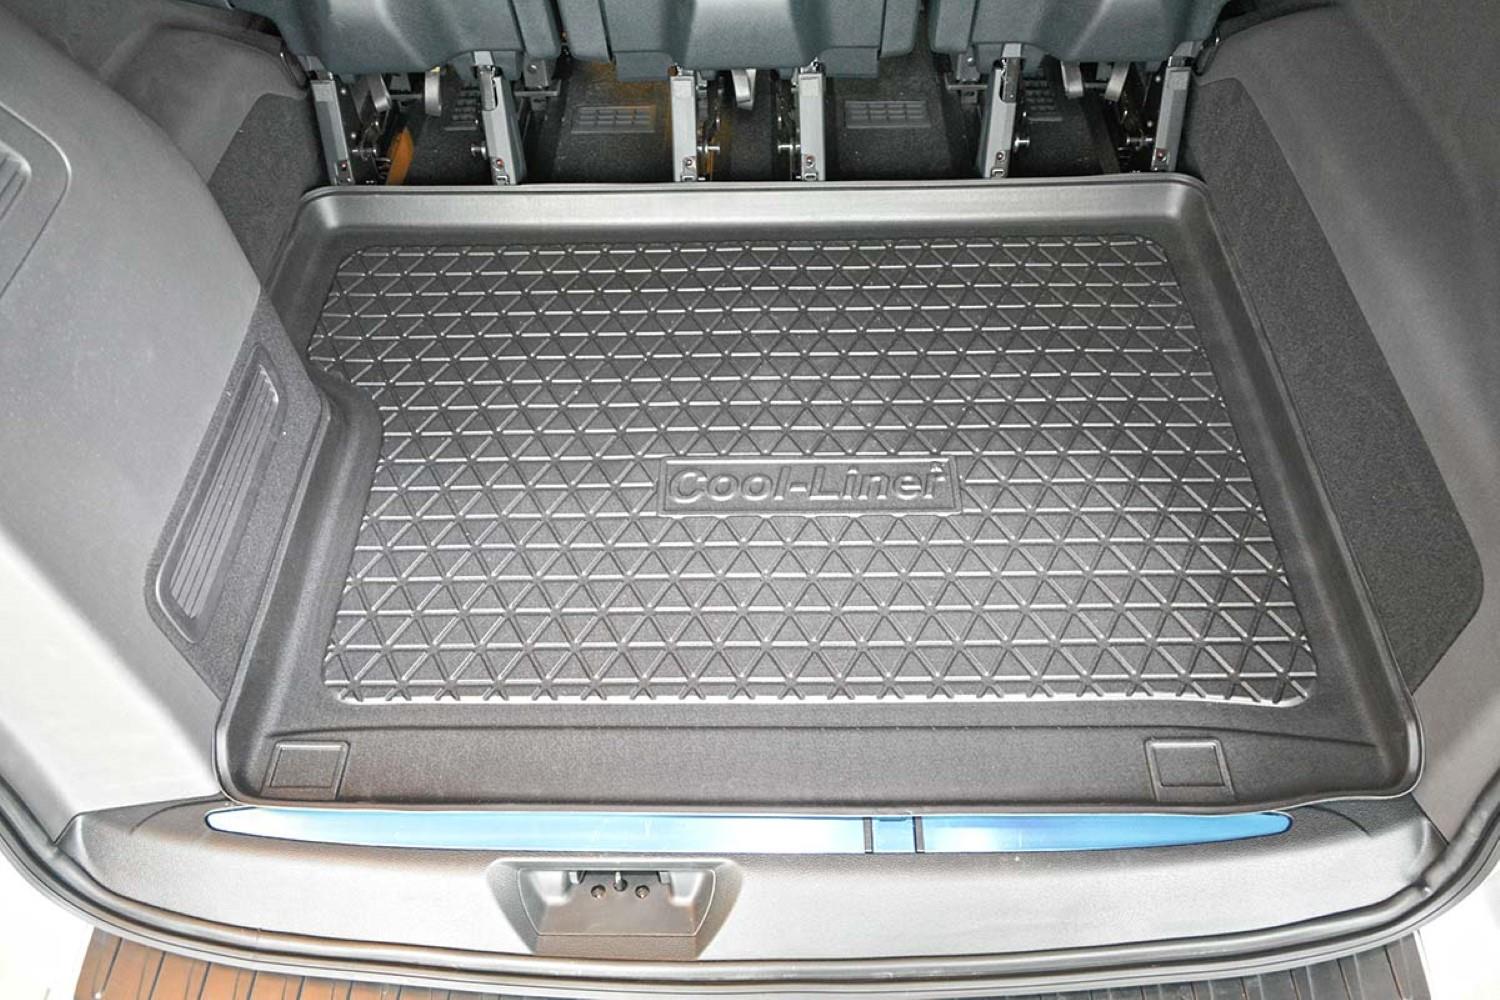  Tapis Coffre Voiture, pour Ford F350 2017- Imperméable Anti  Rayures Housse Protection Coffre Tapis Interior Accessories,C